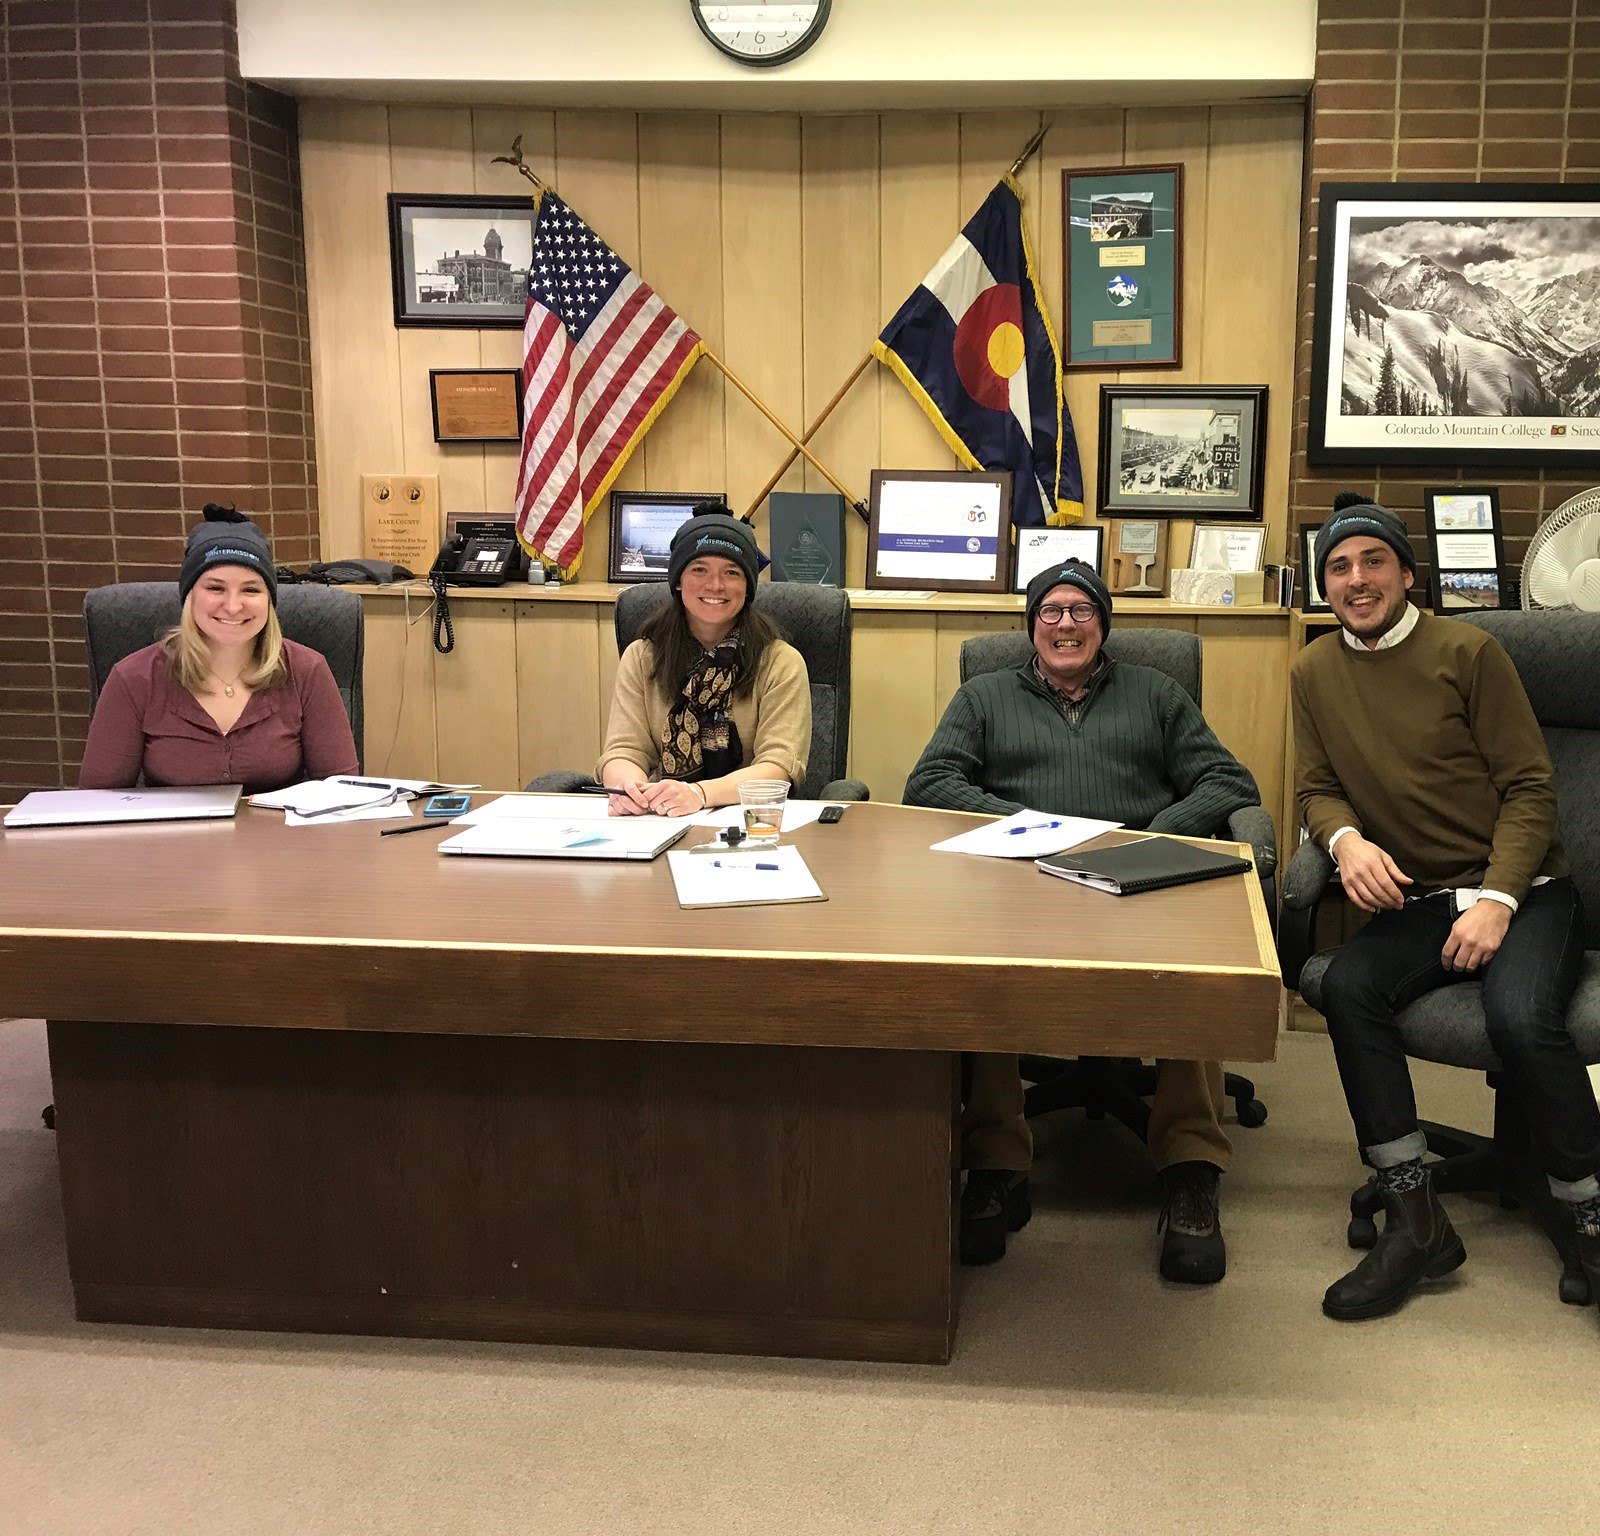 Four people wearing winter hats smiling sitting at a desk